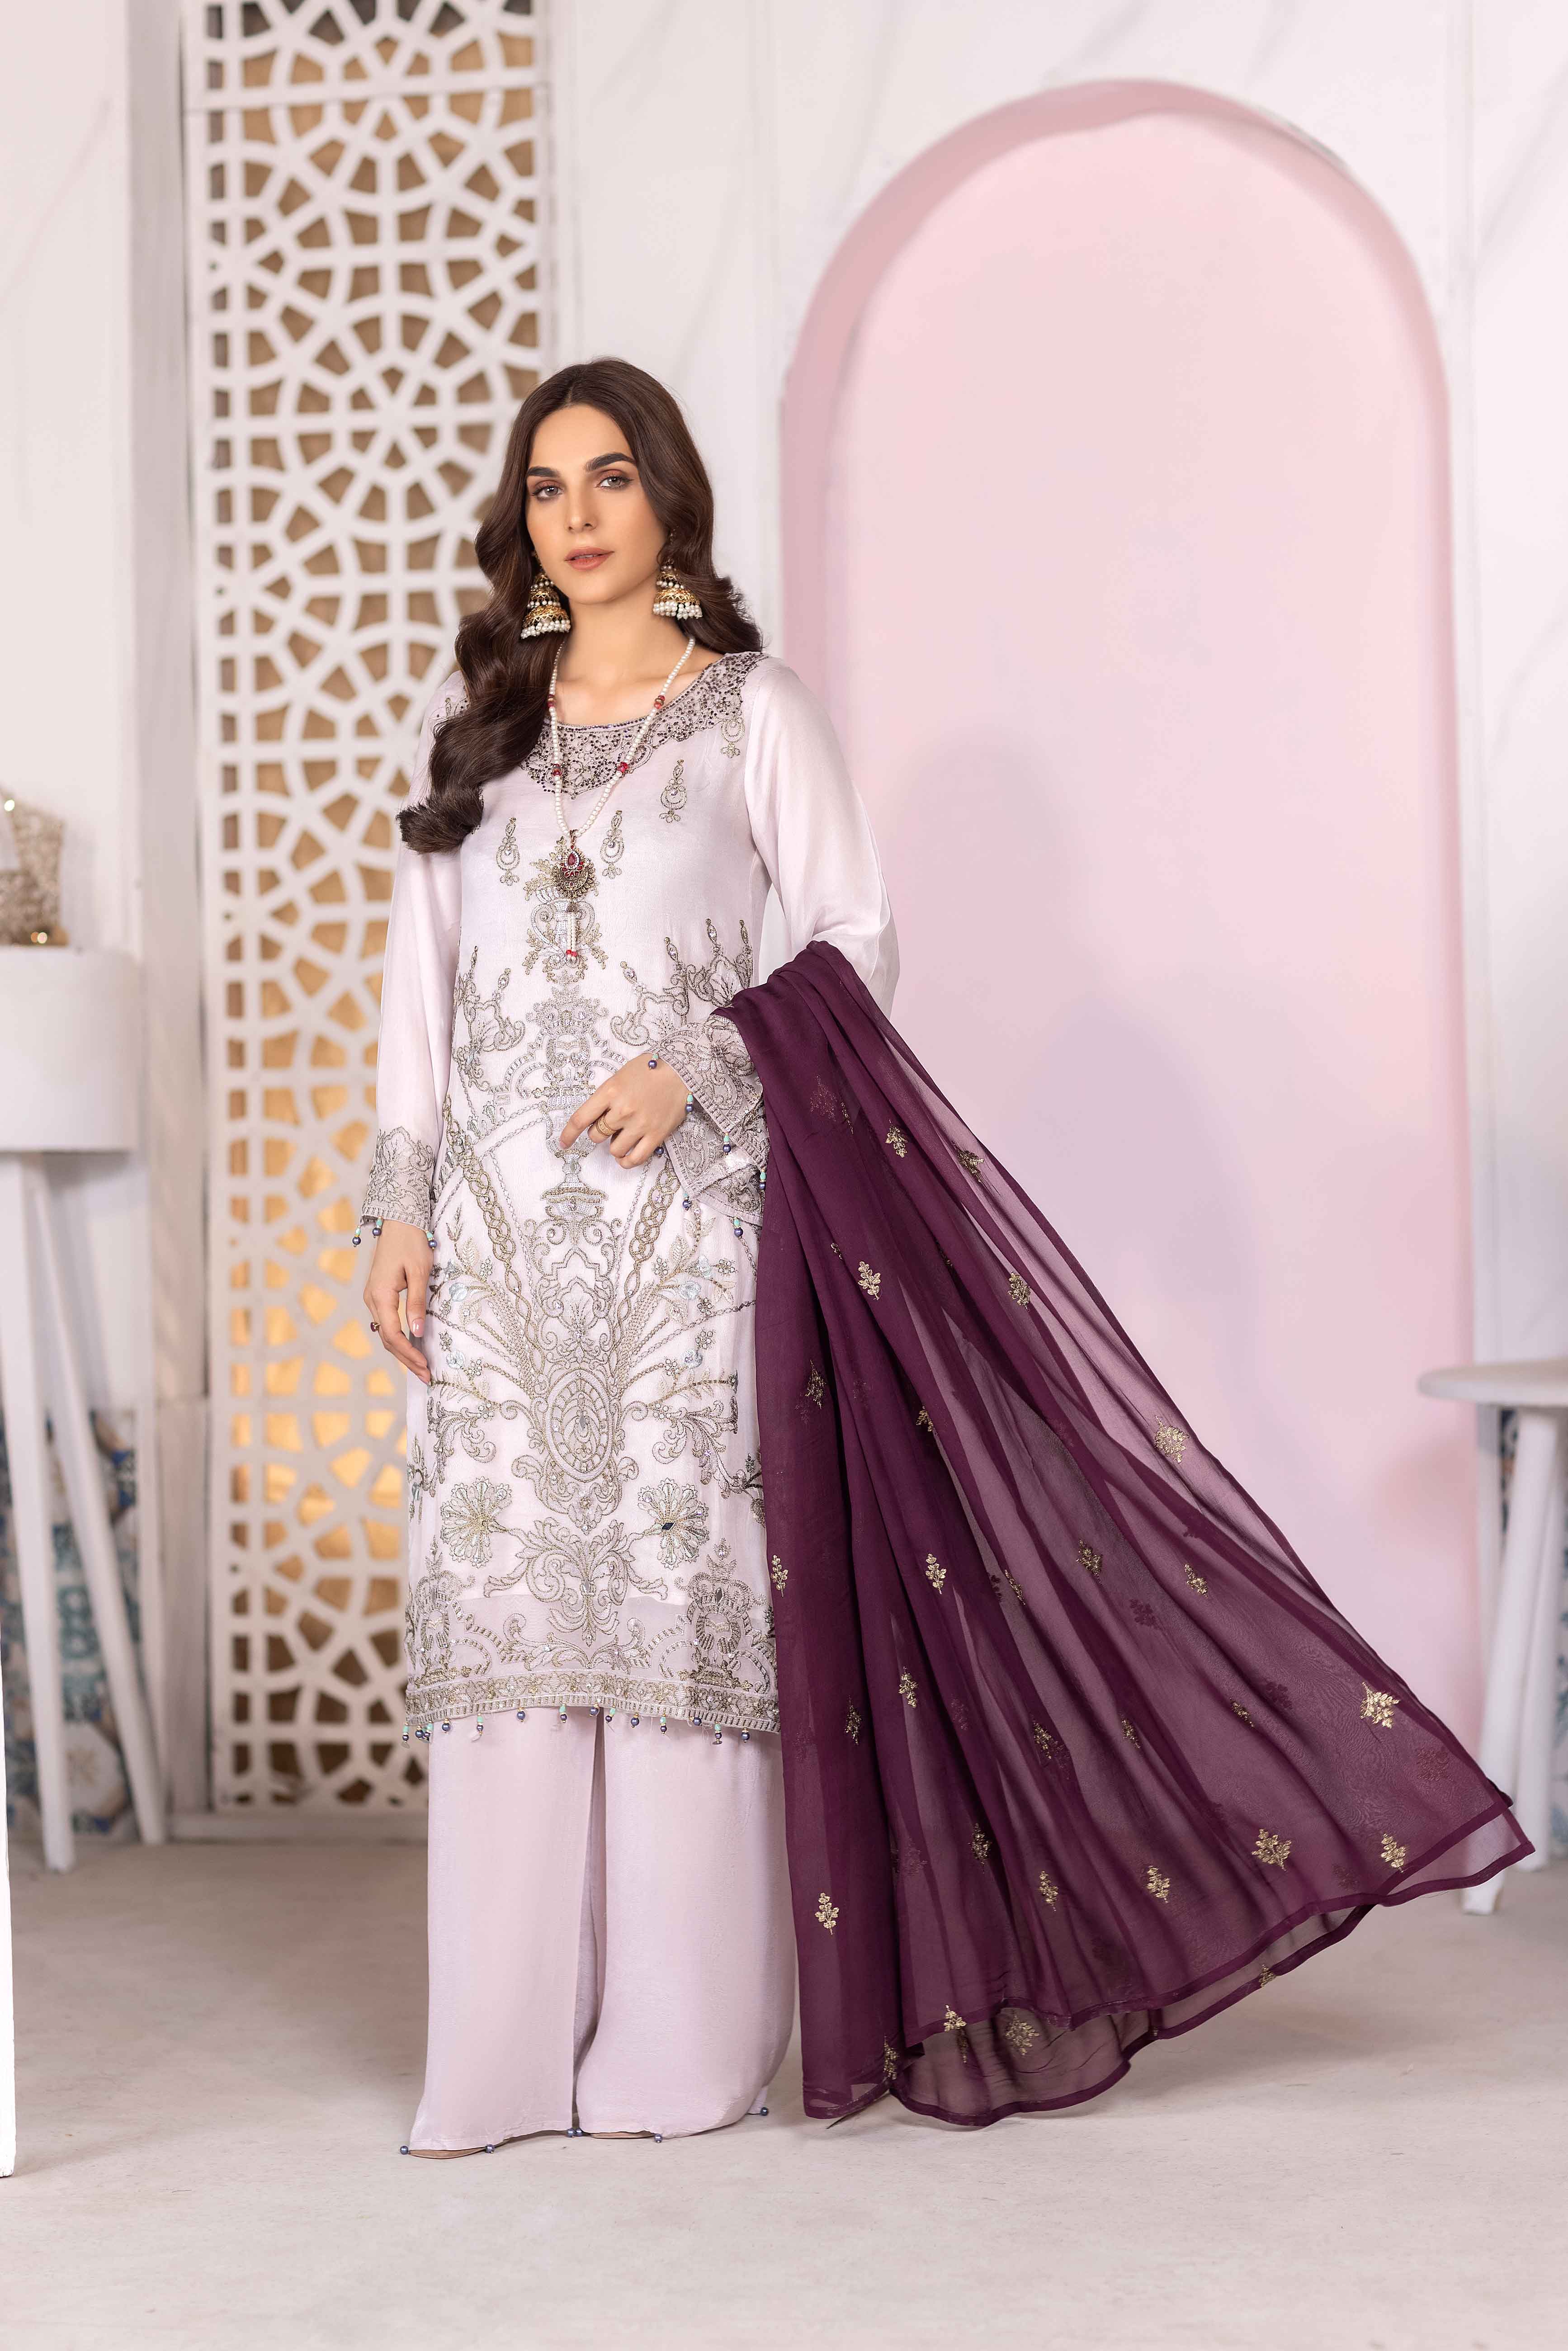 Simrans Mother & Daughter Chiffon Eid Outfit Cosmic Sky